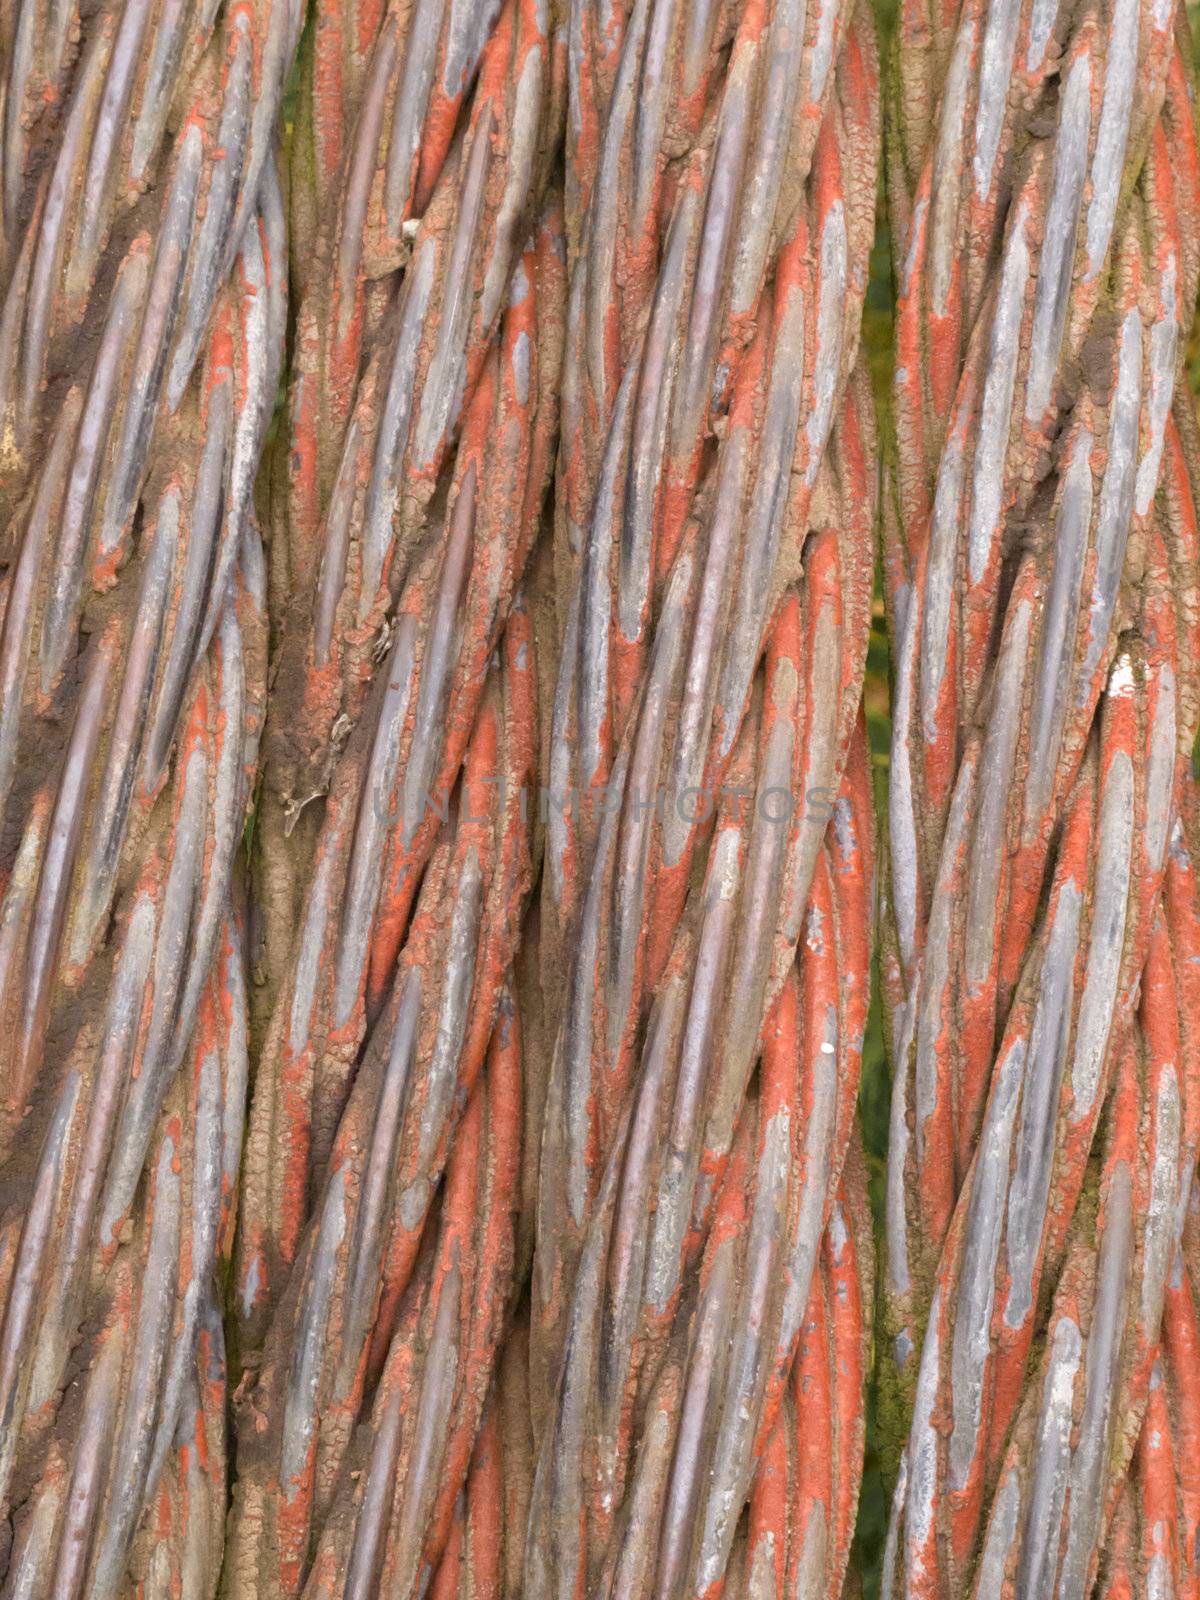 Background texture pattern of old rusty stranded steel cable